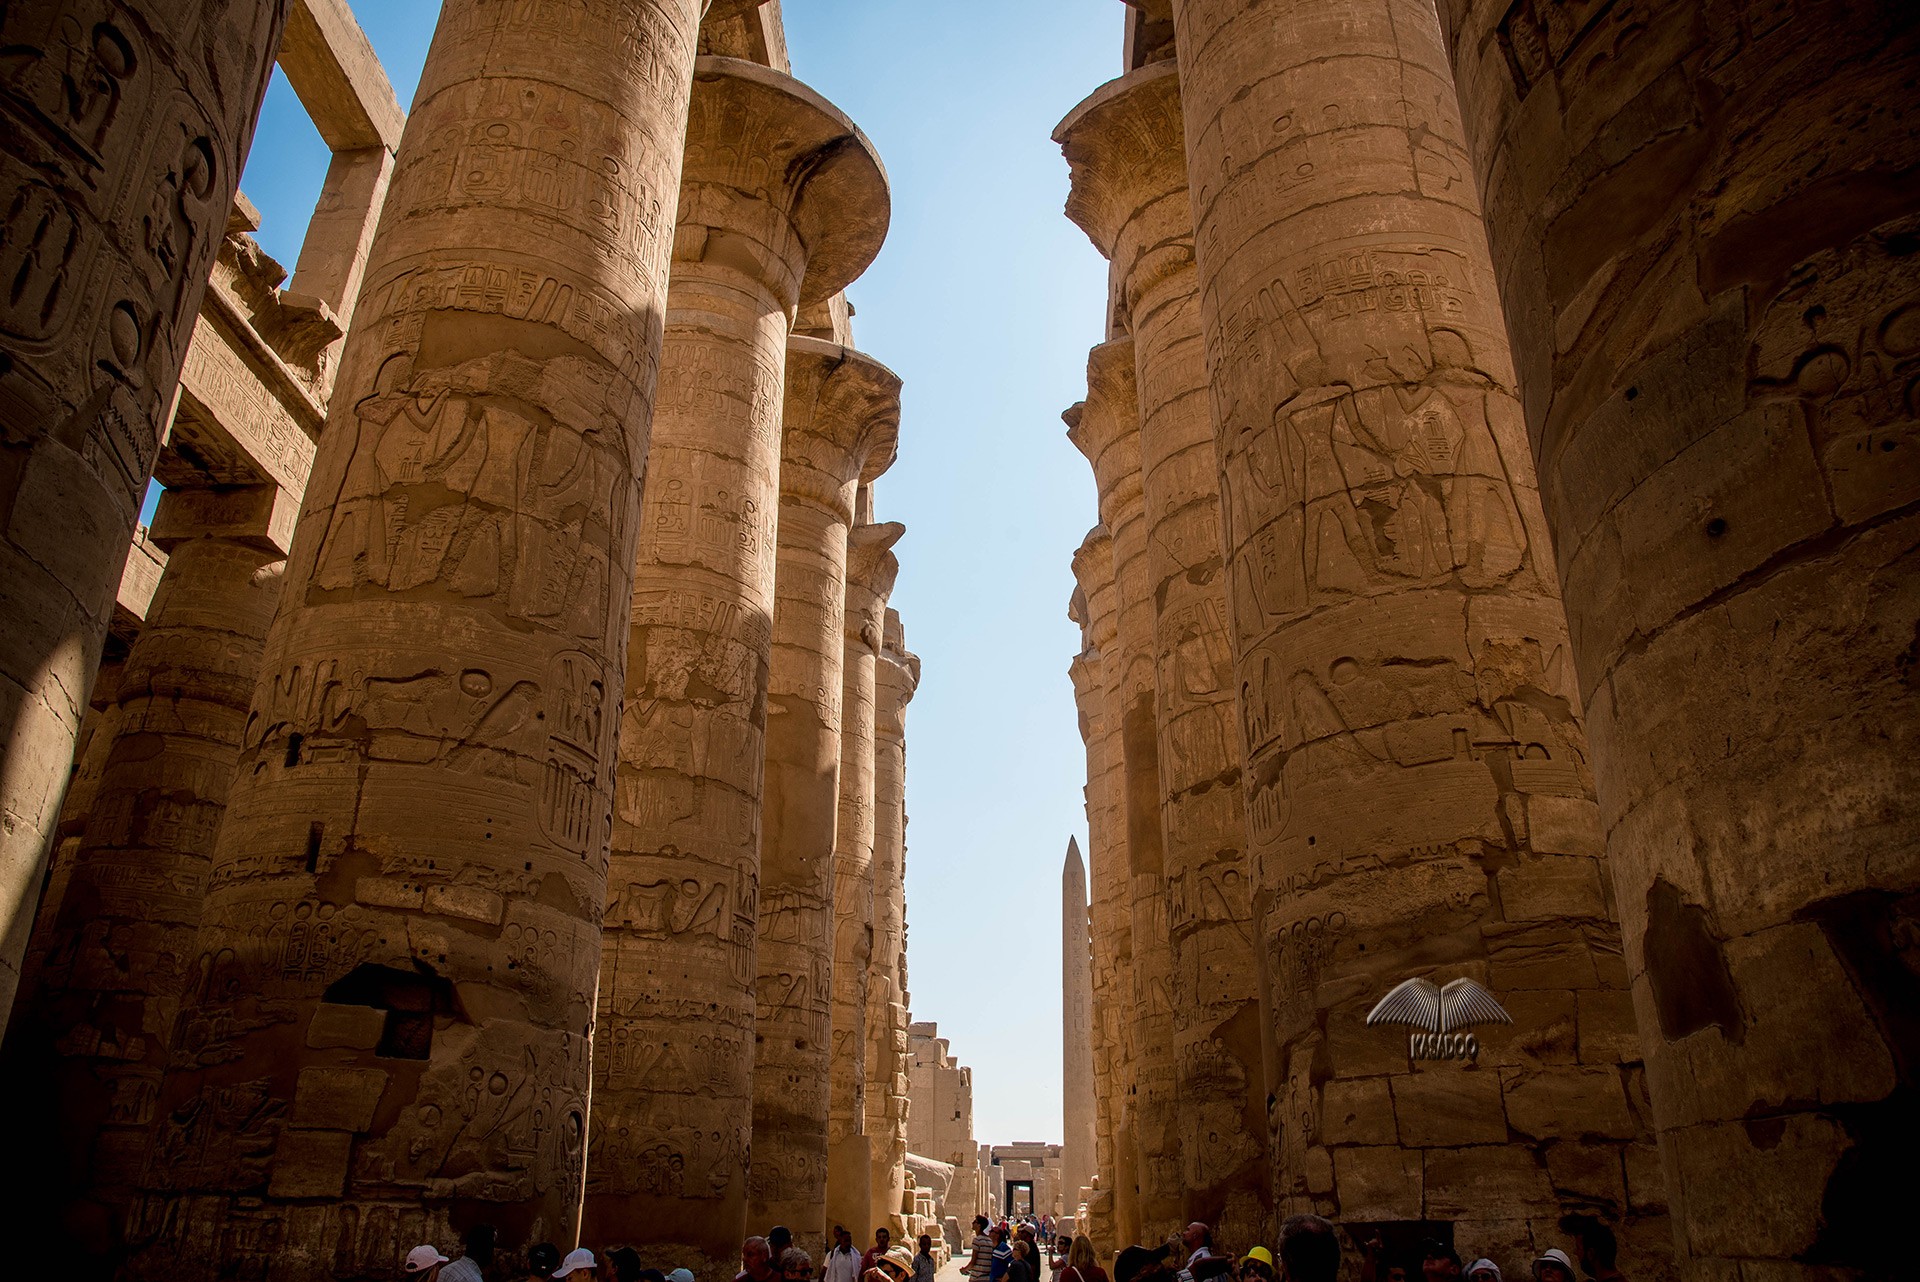 The Hypostyle Hall built by Seti I